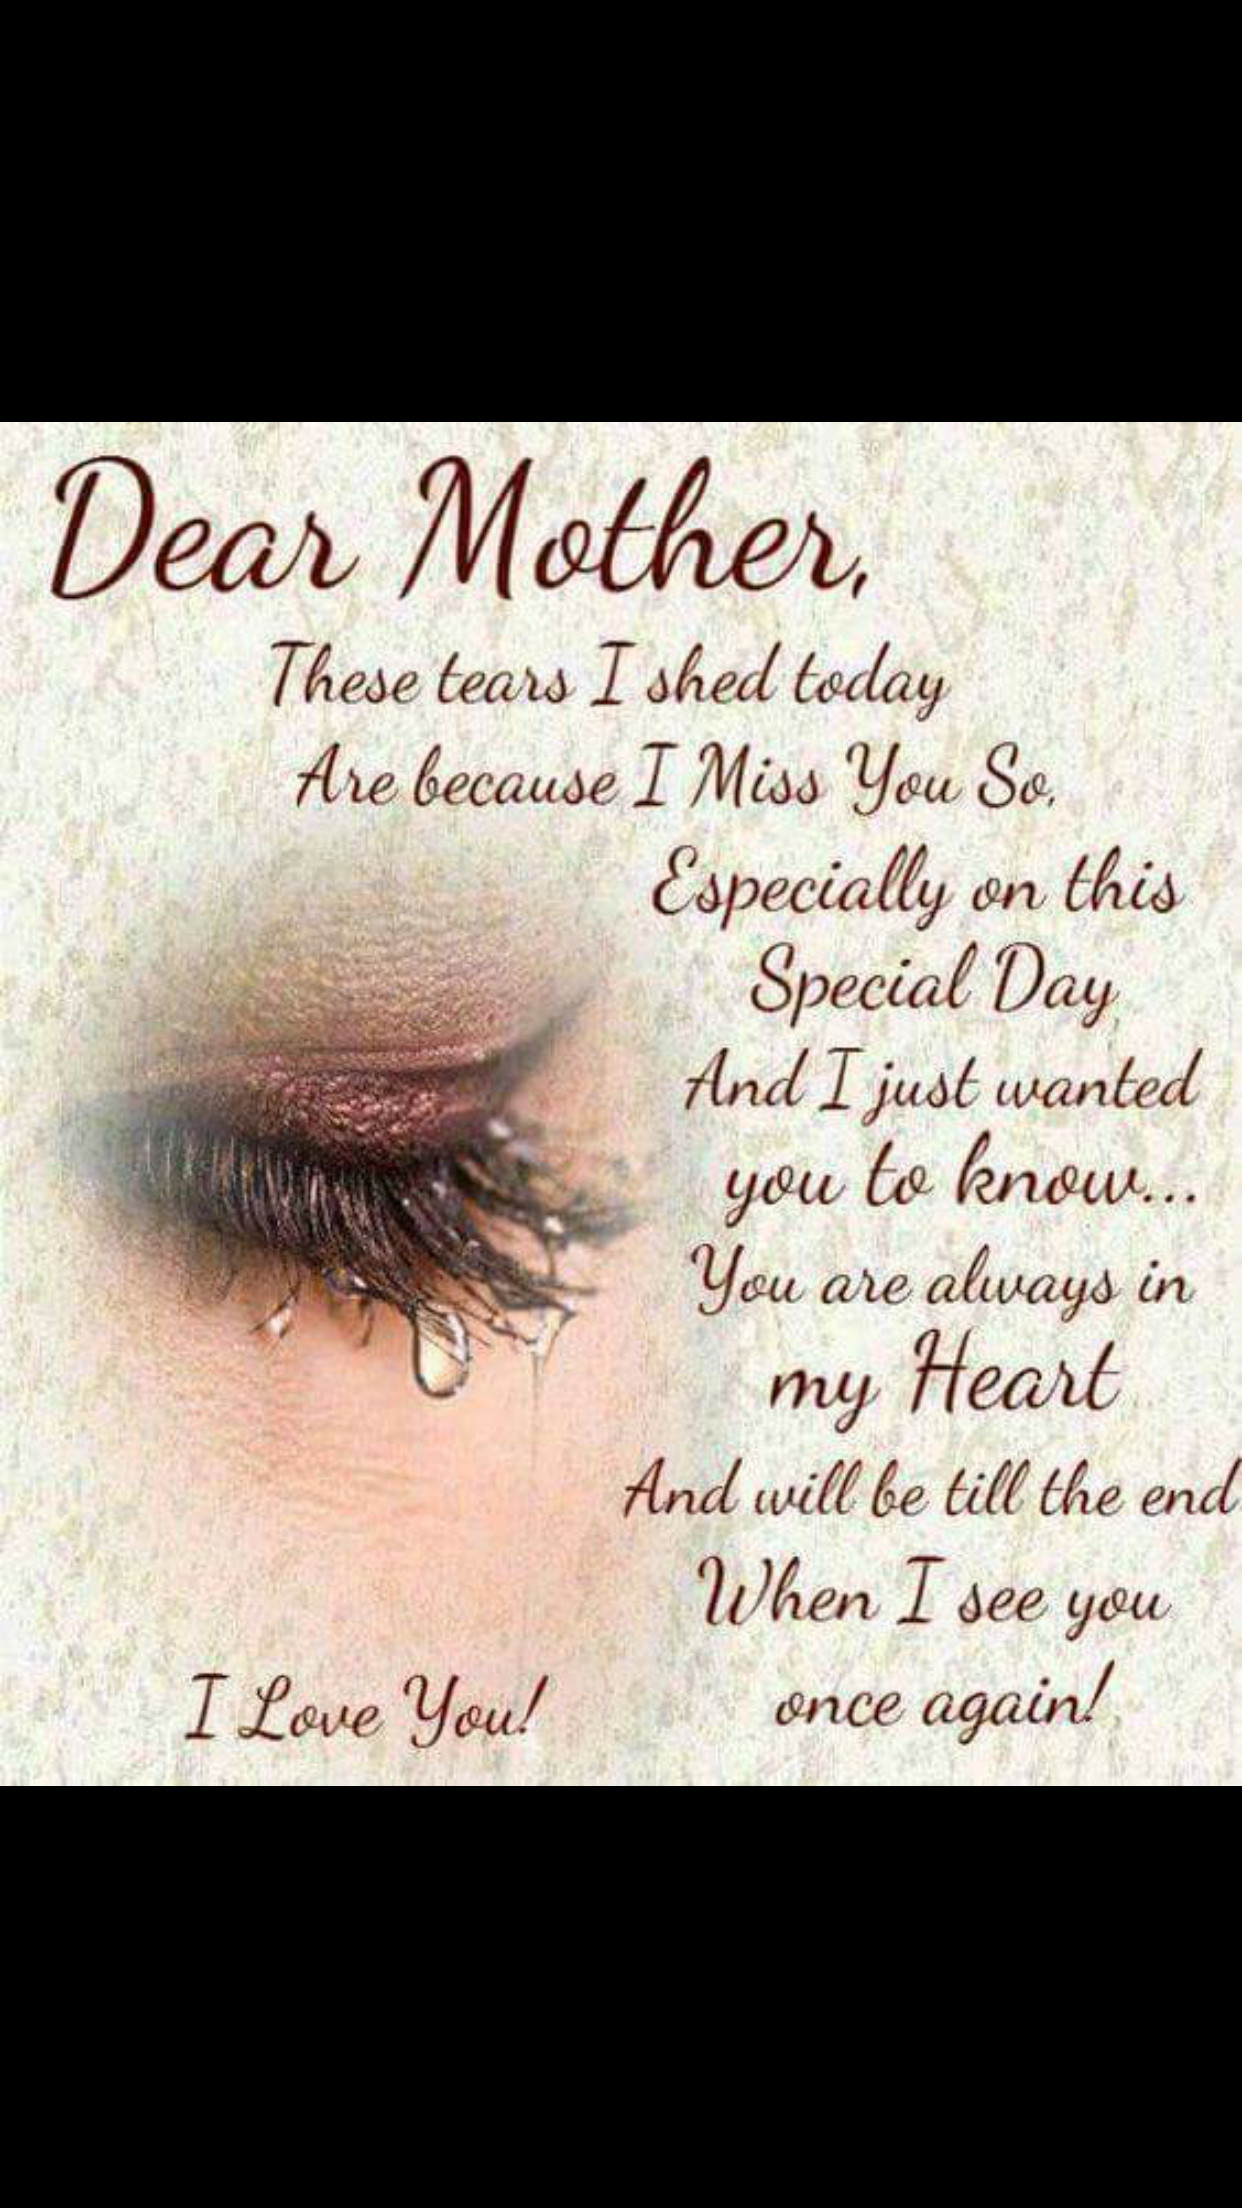 Quotes About Loss Of A Mother
 Dee and Missye I am saving this just for each of you as I